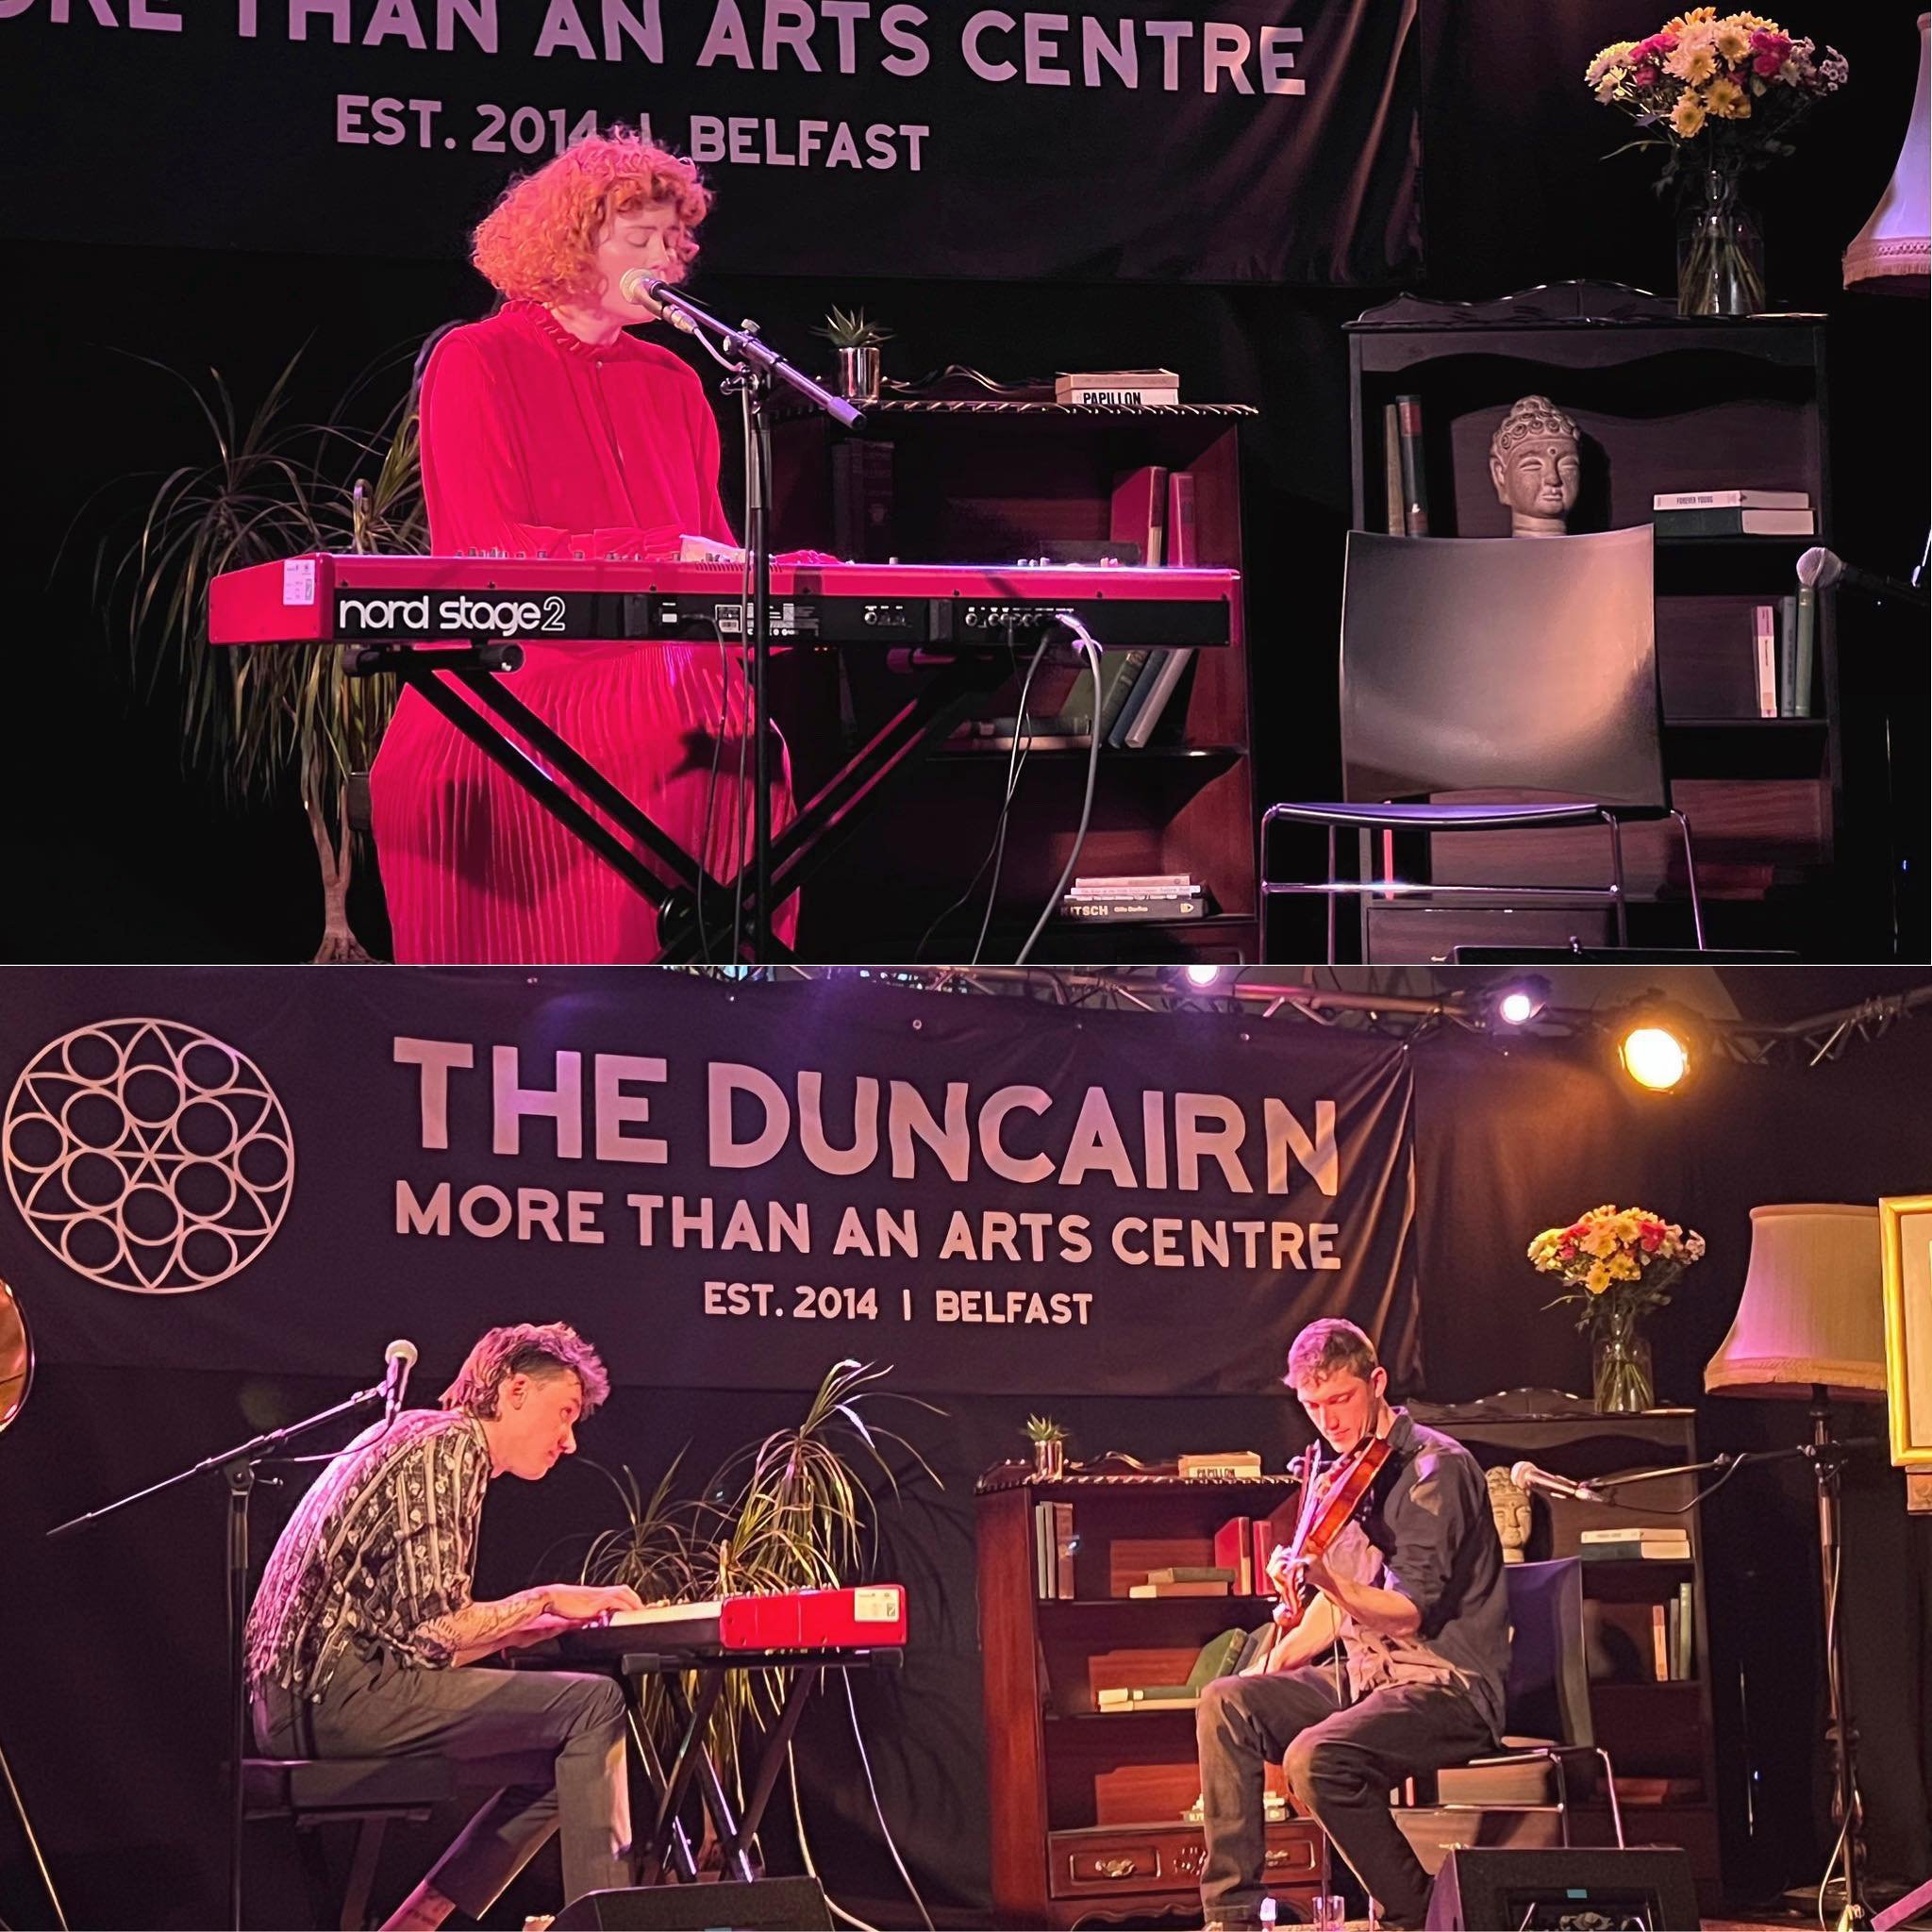 When you get it right and you know you&rsquo;ve nailed it, magic just happens. Tonight at our 10th Birthday bash was one of those very special events. M&iacute;le bu&iacute;ochas @megannicruairi agus @cgjpmusic. It was a beauty! #music #irishmusic #s